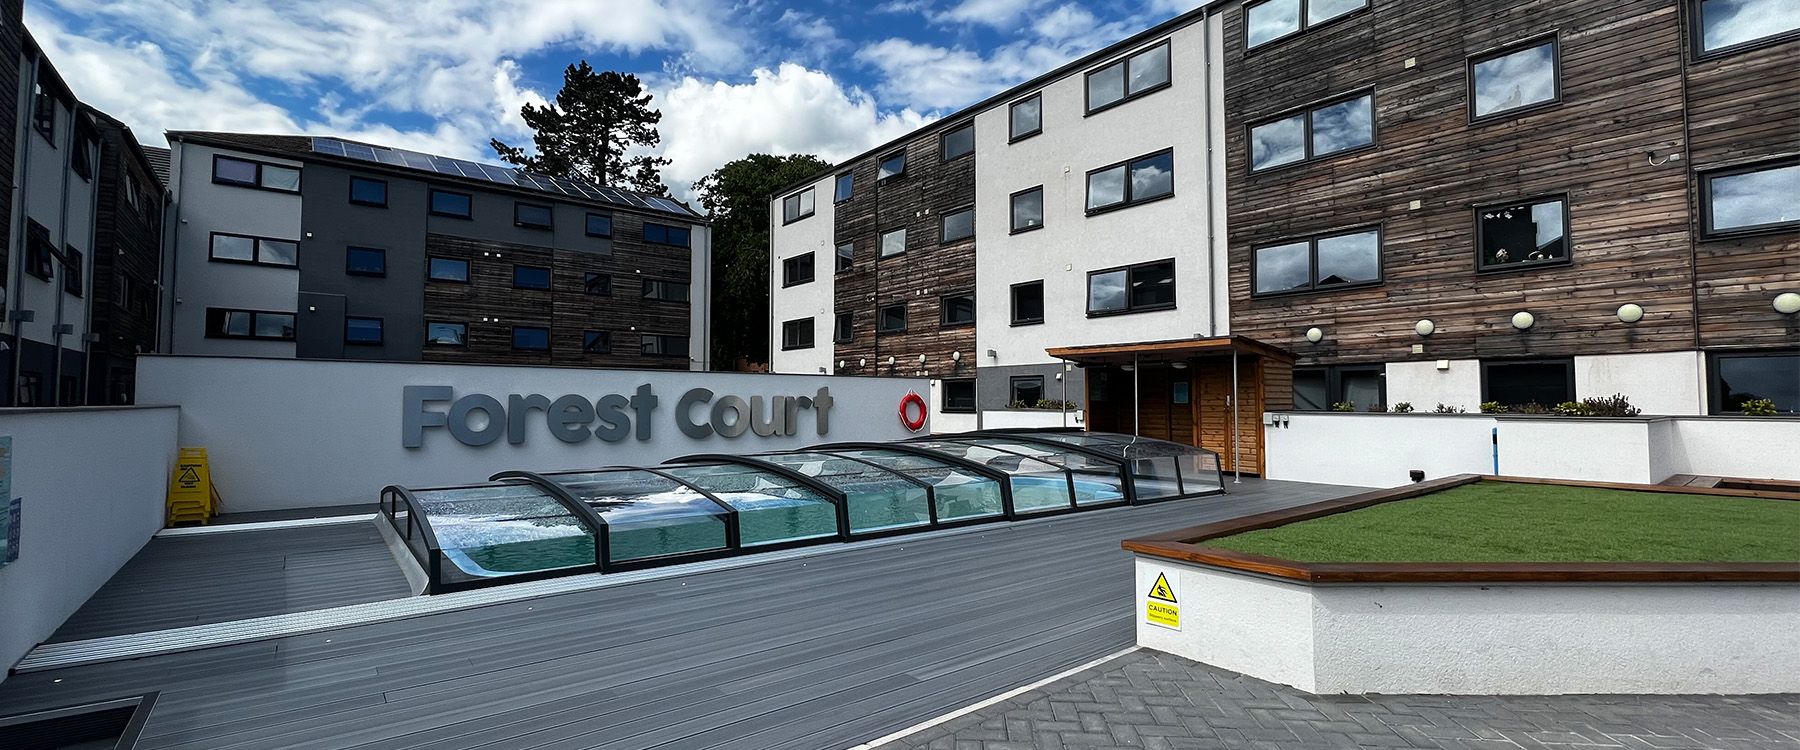 Forest Court Loughborough Accommodation - Enjoy a luxurious outdoor heated pool and BBQ area